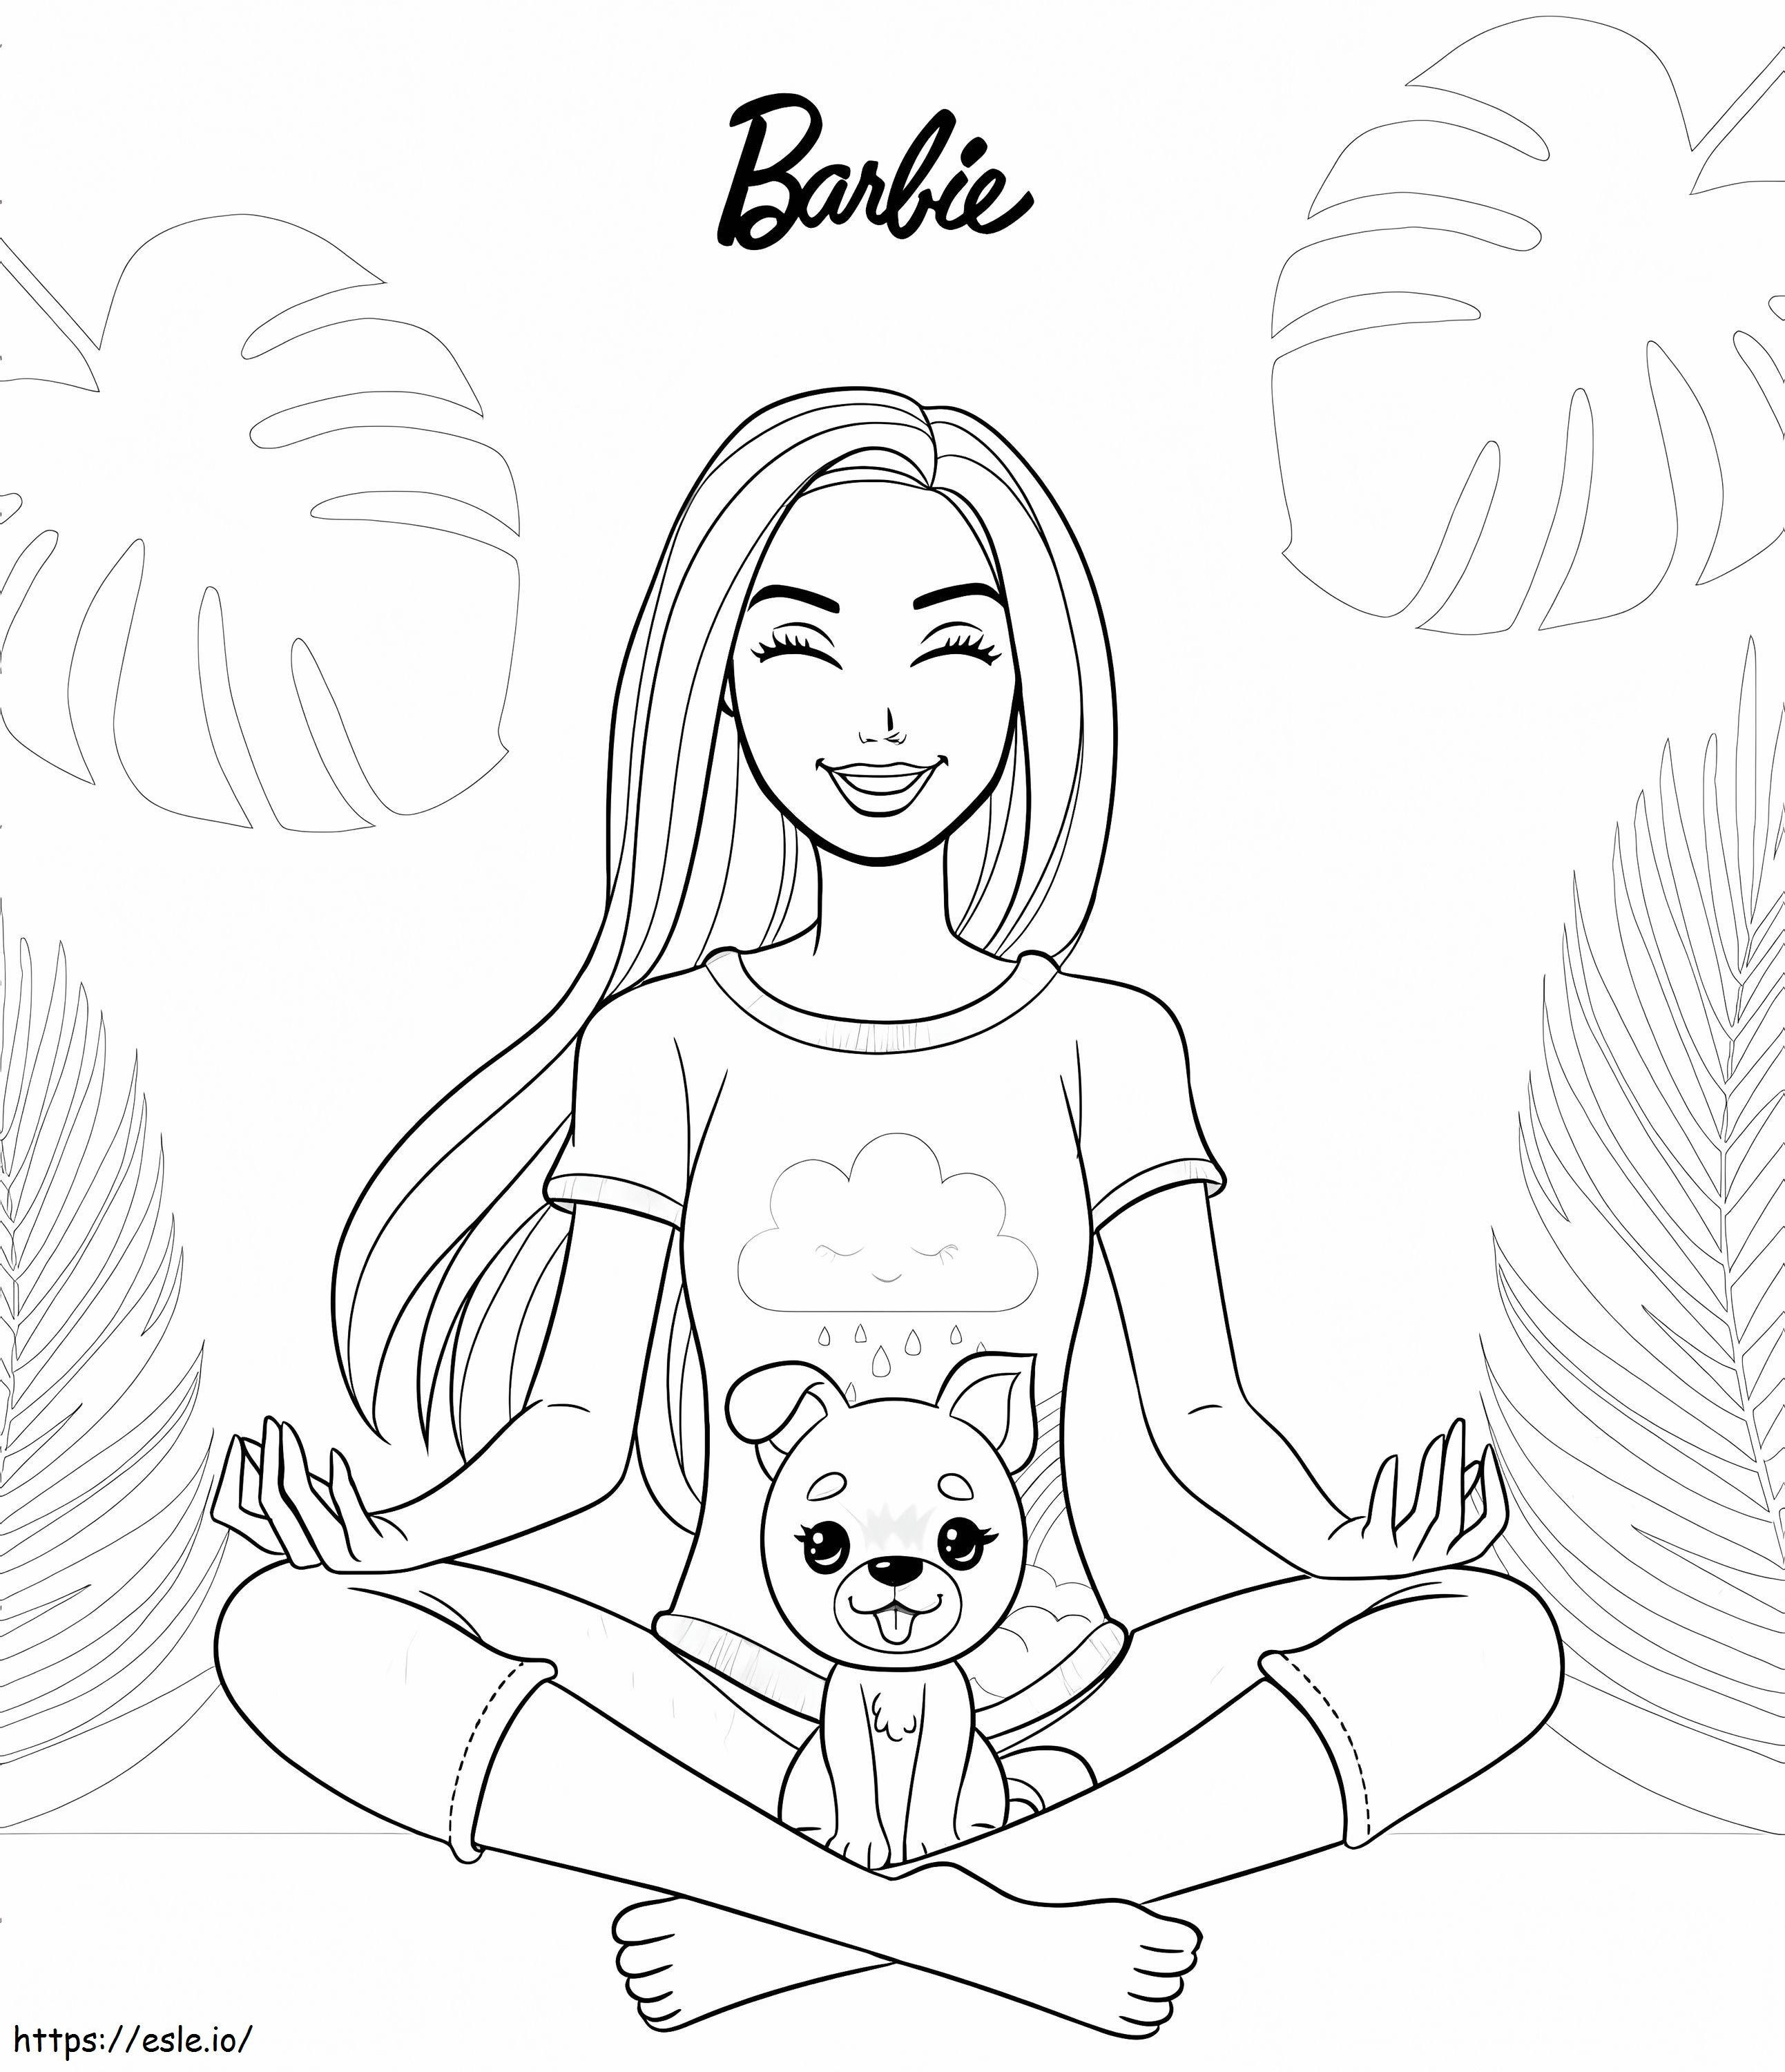 Barbie And Cute Puppy coloring page